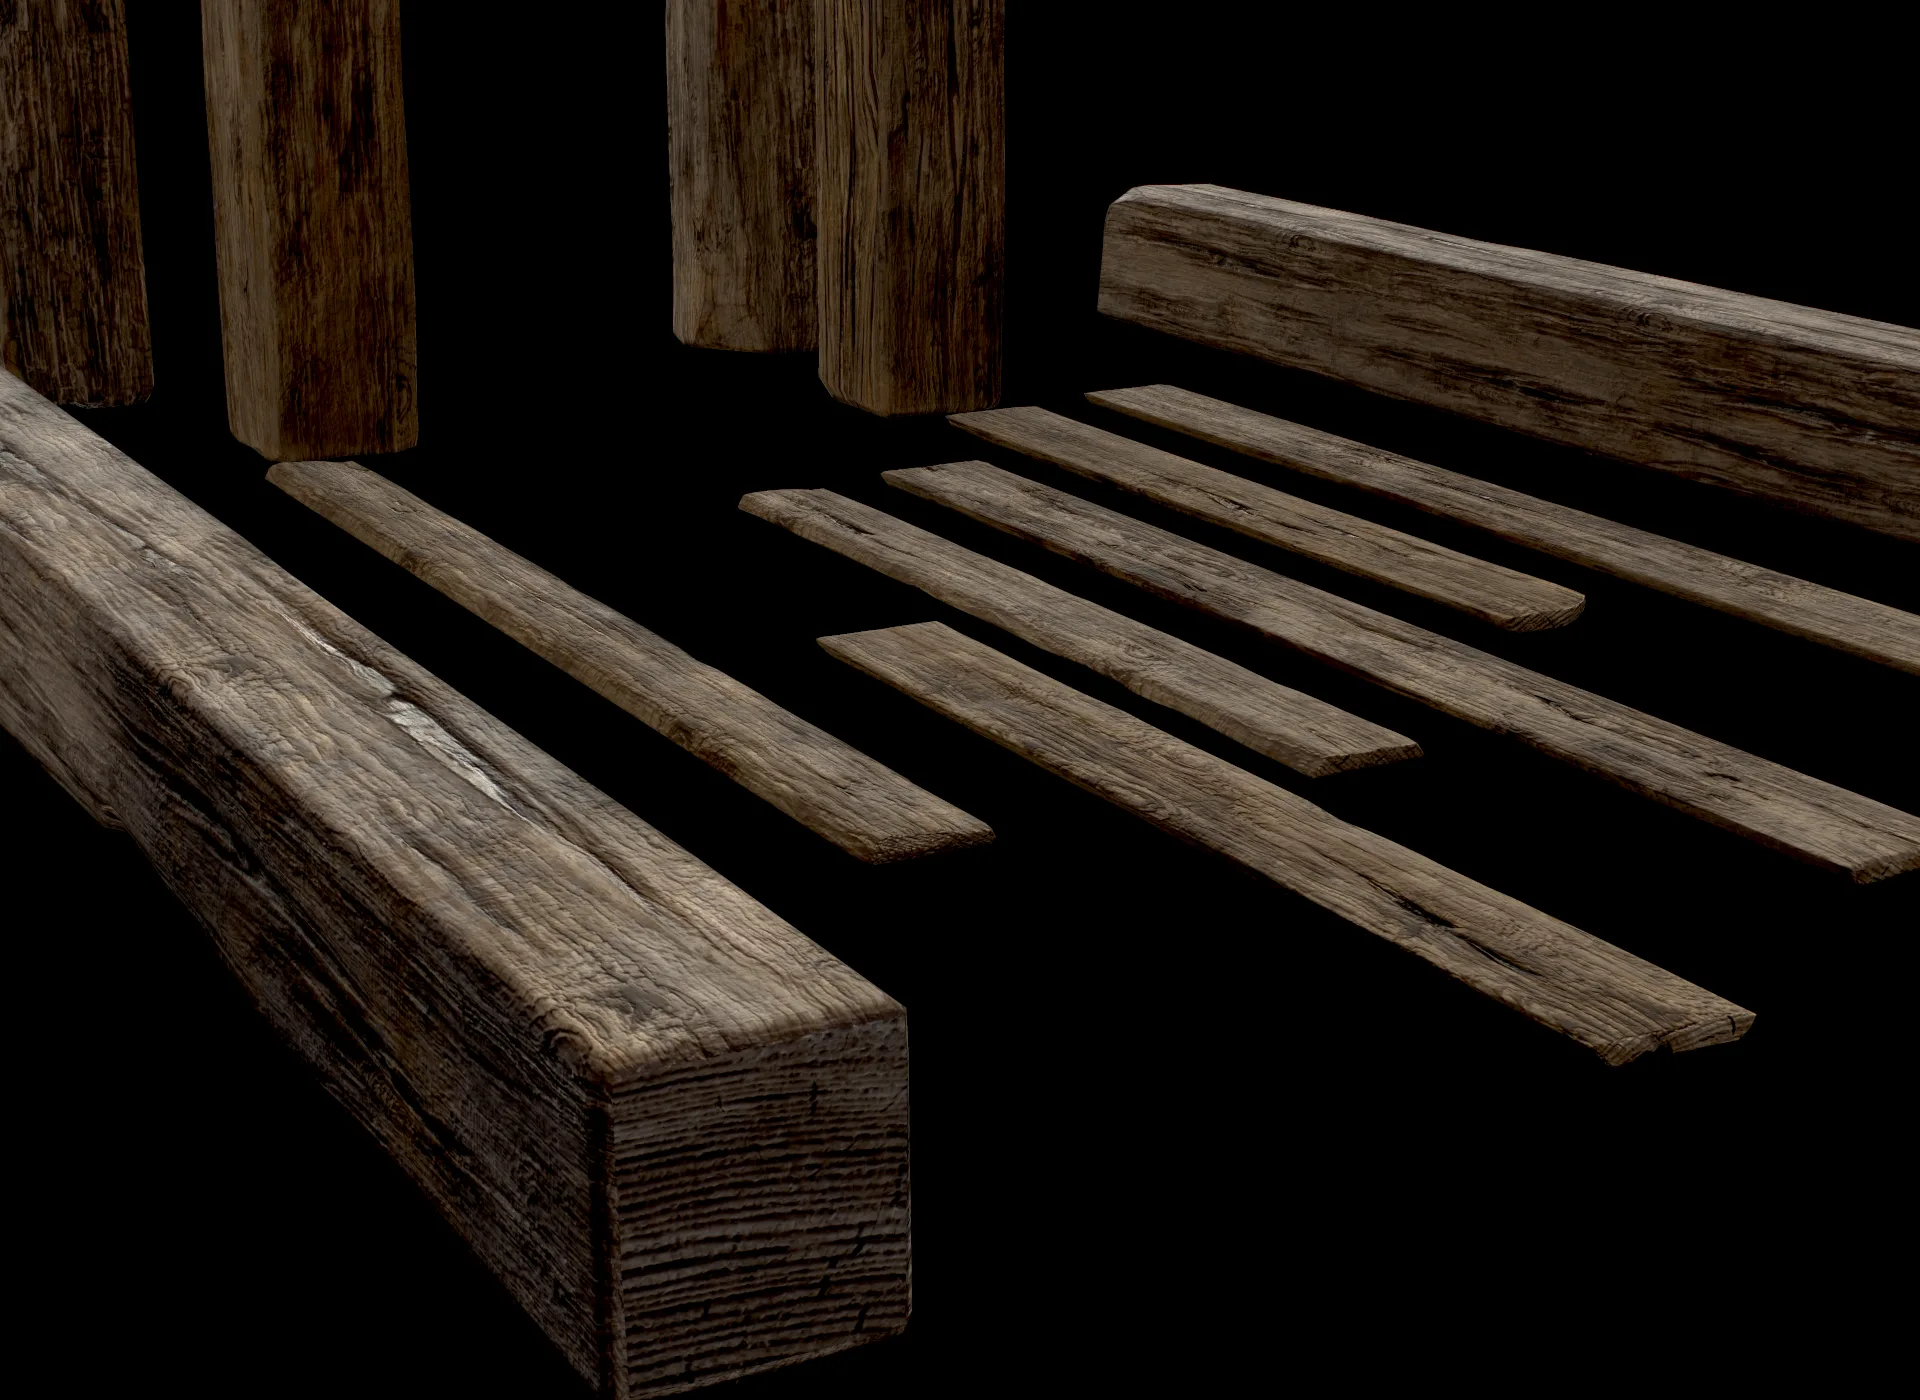 Wooden Planks and Beams - 13 pieces